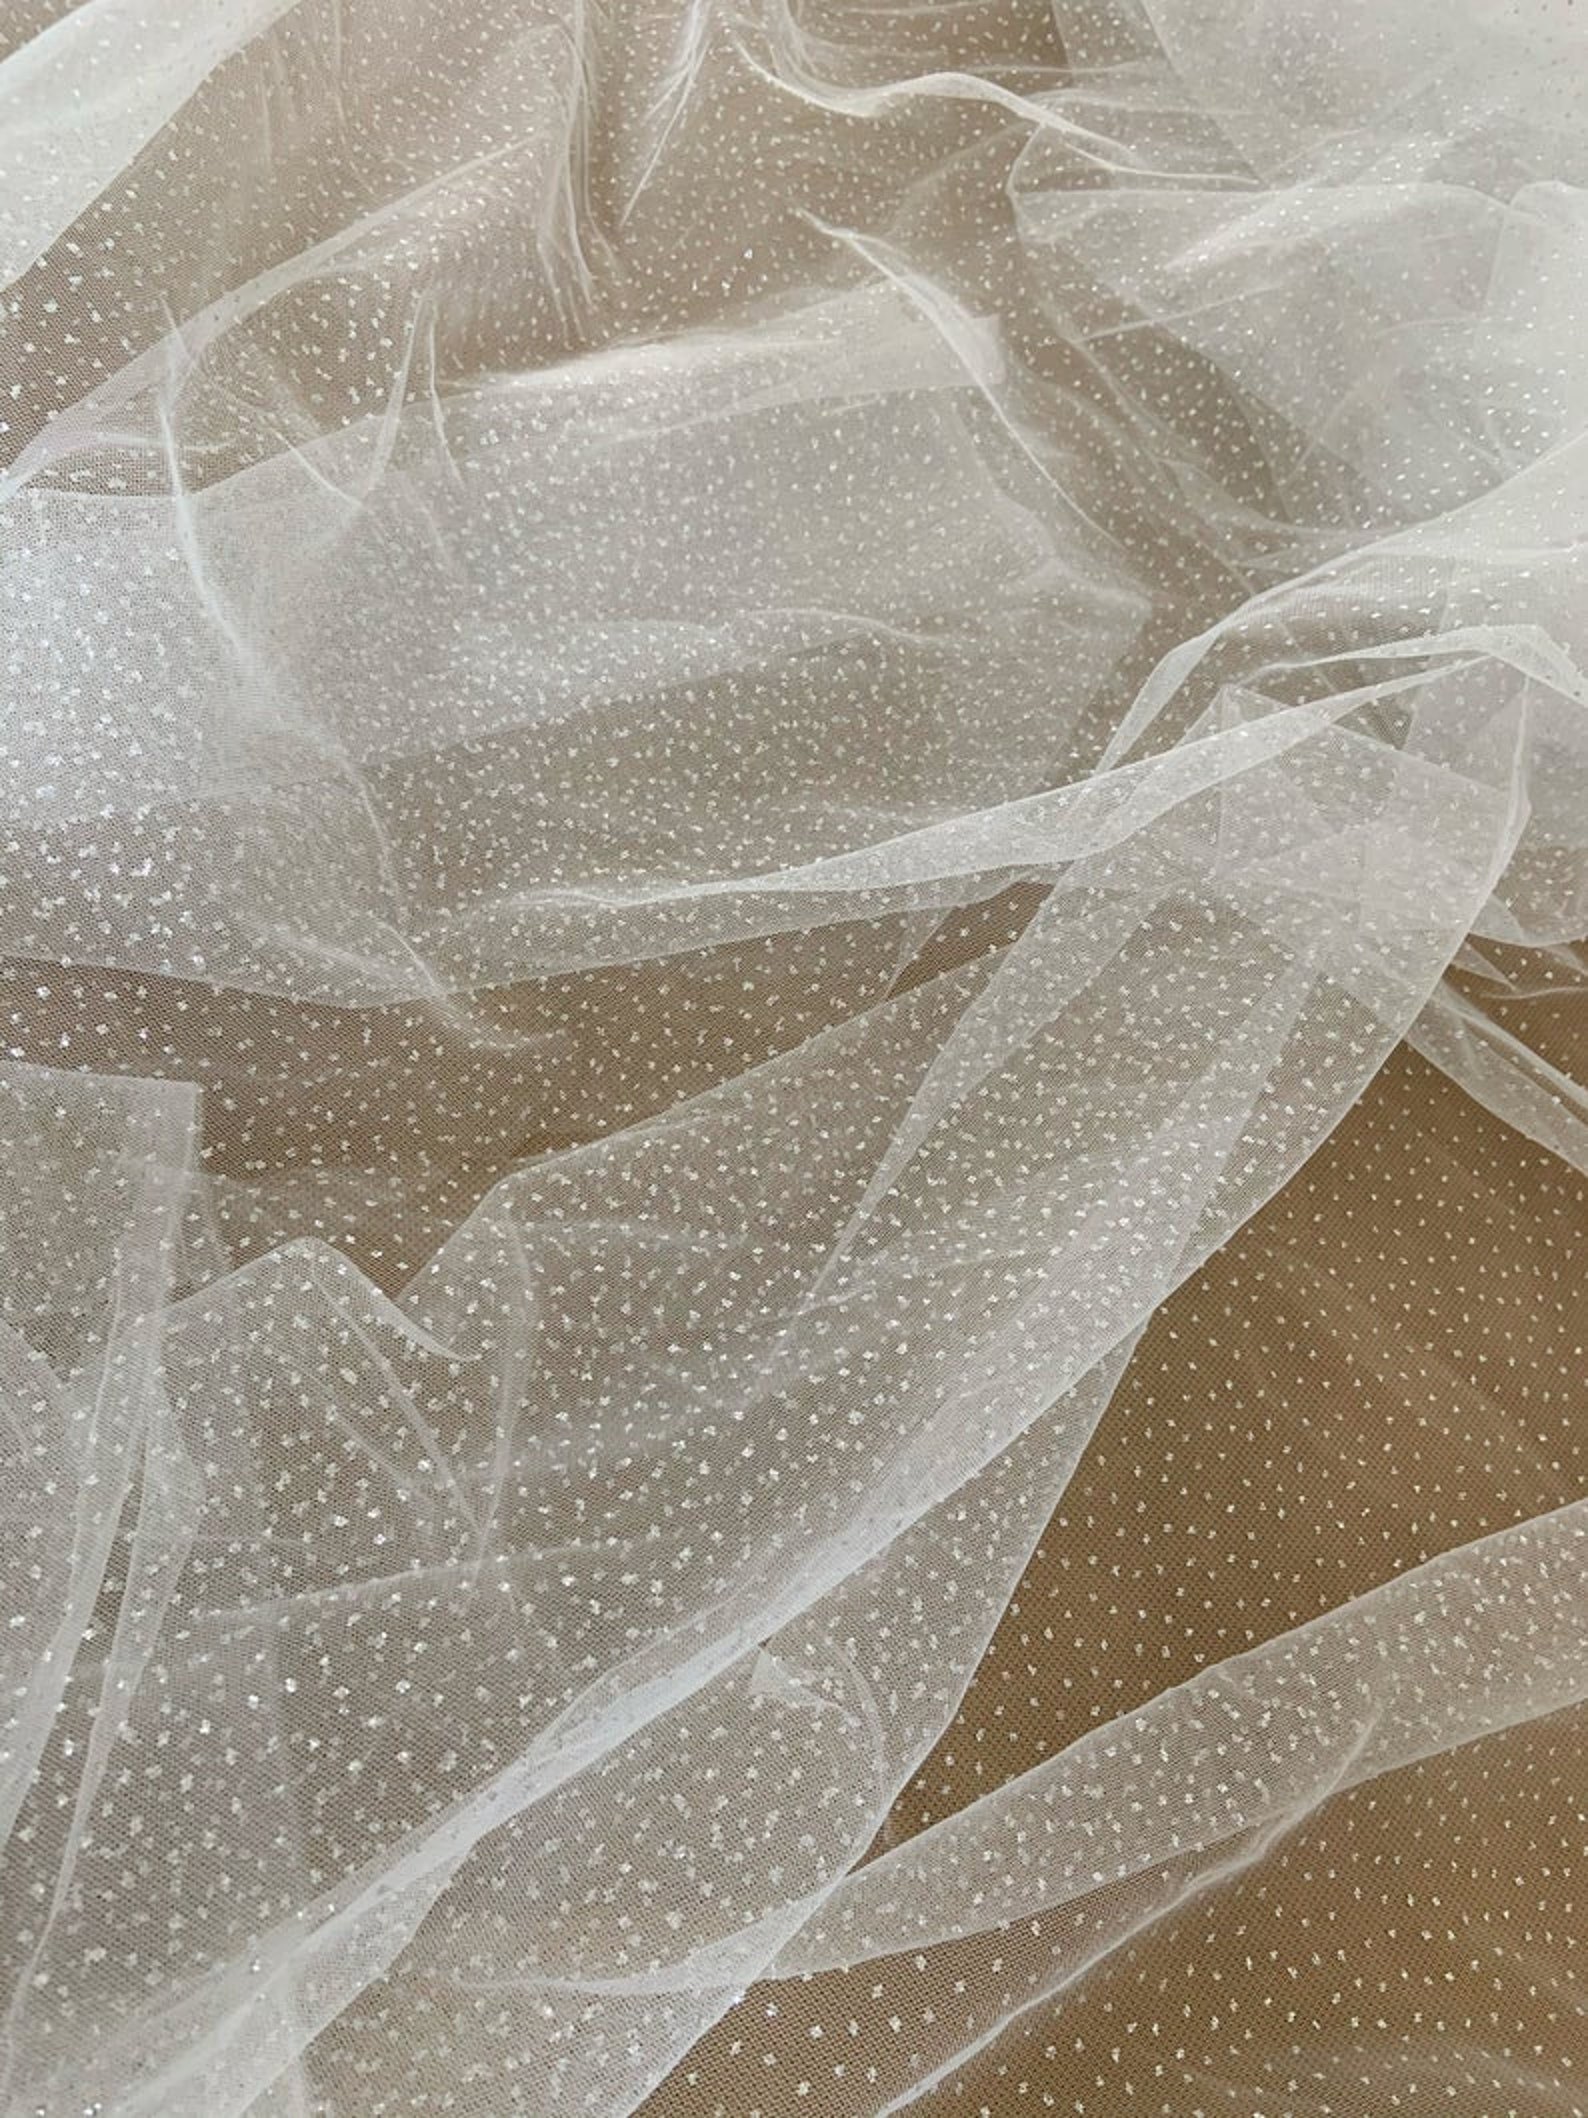 Tong Gu Bronzing Mesh Glitter Fabric Lace Tulle Sequin for Wedding Bridal  Veil Sewing Craft DIY 59x39 inch/150x100 cm (White)